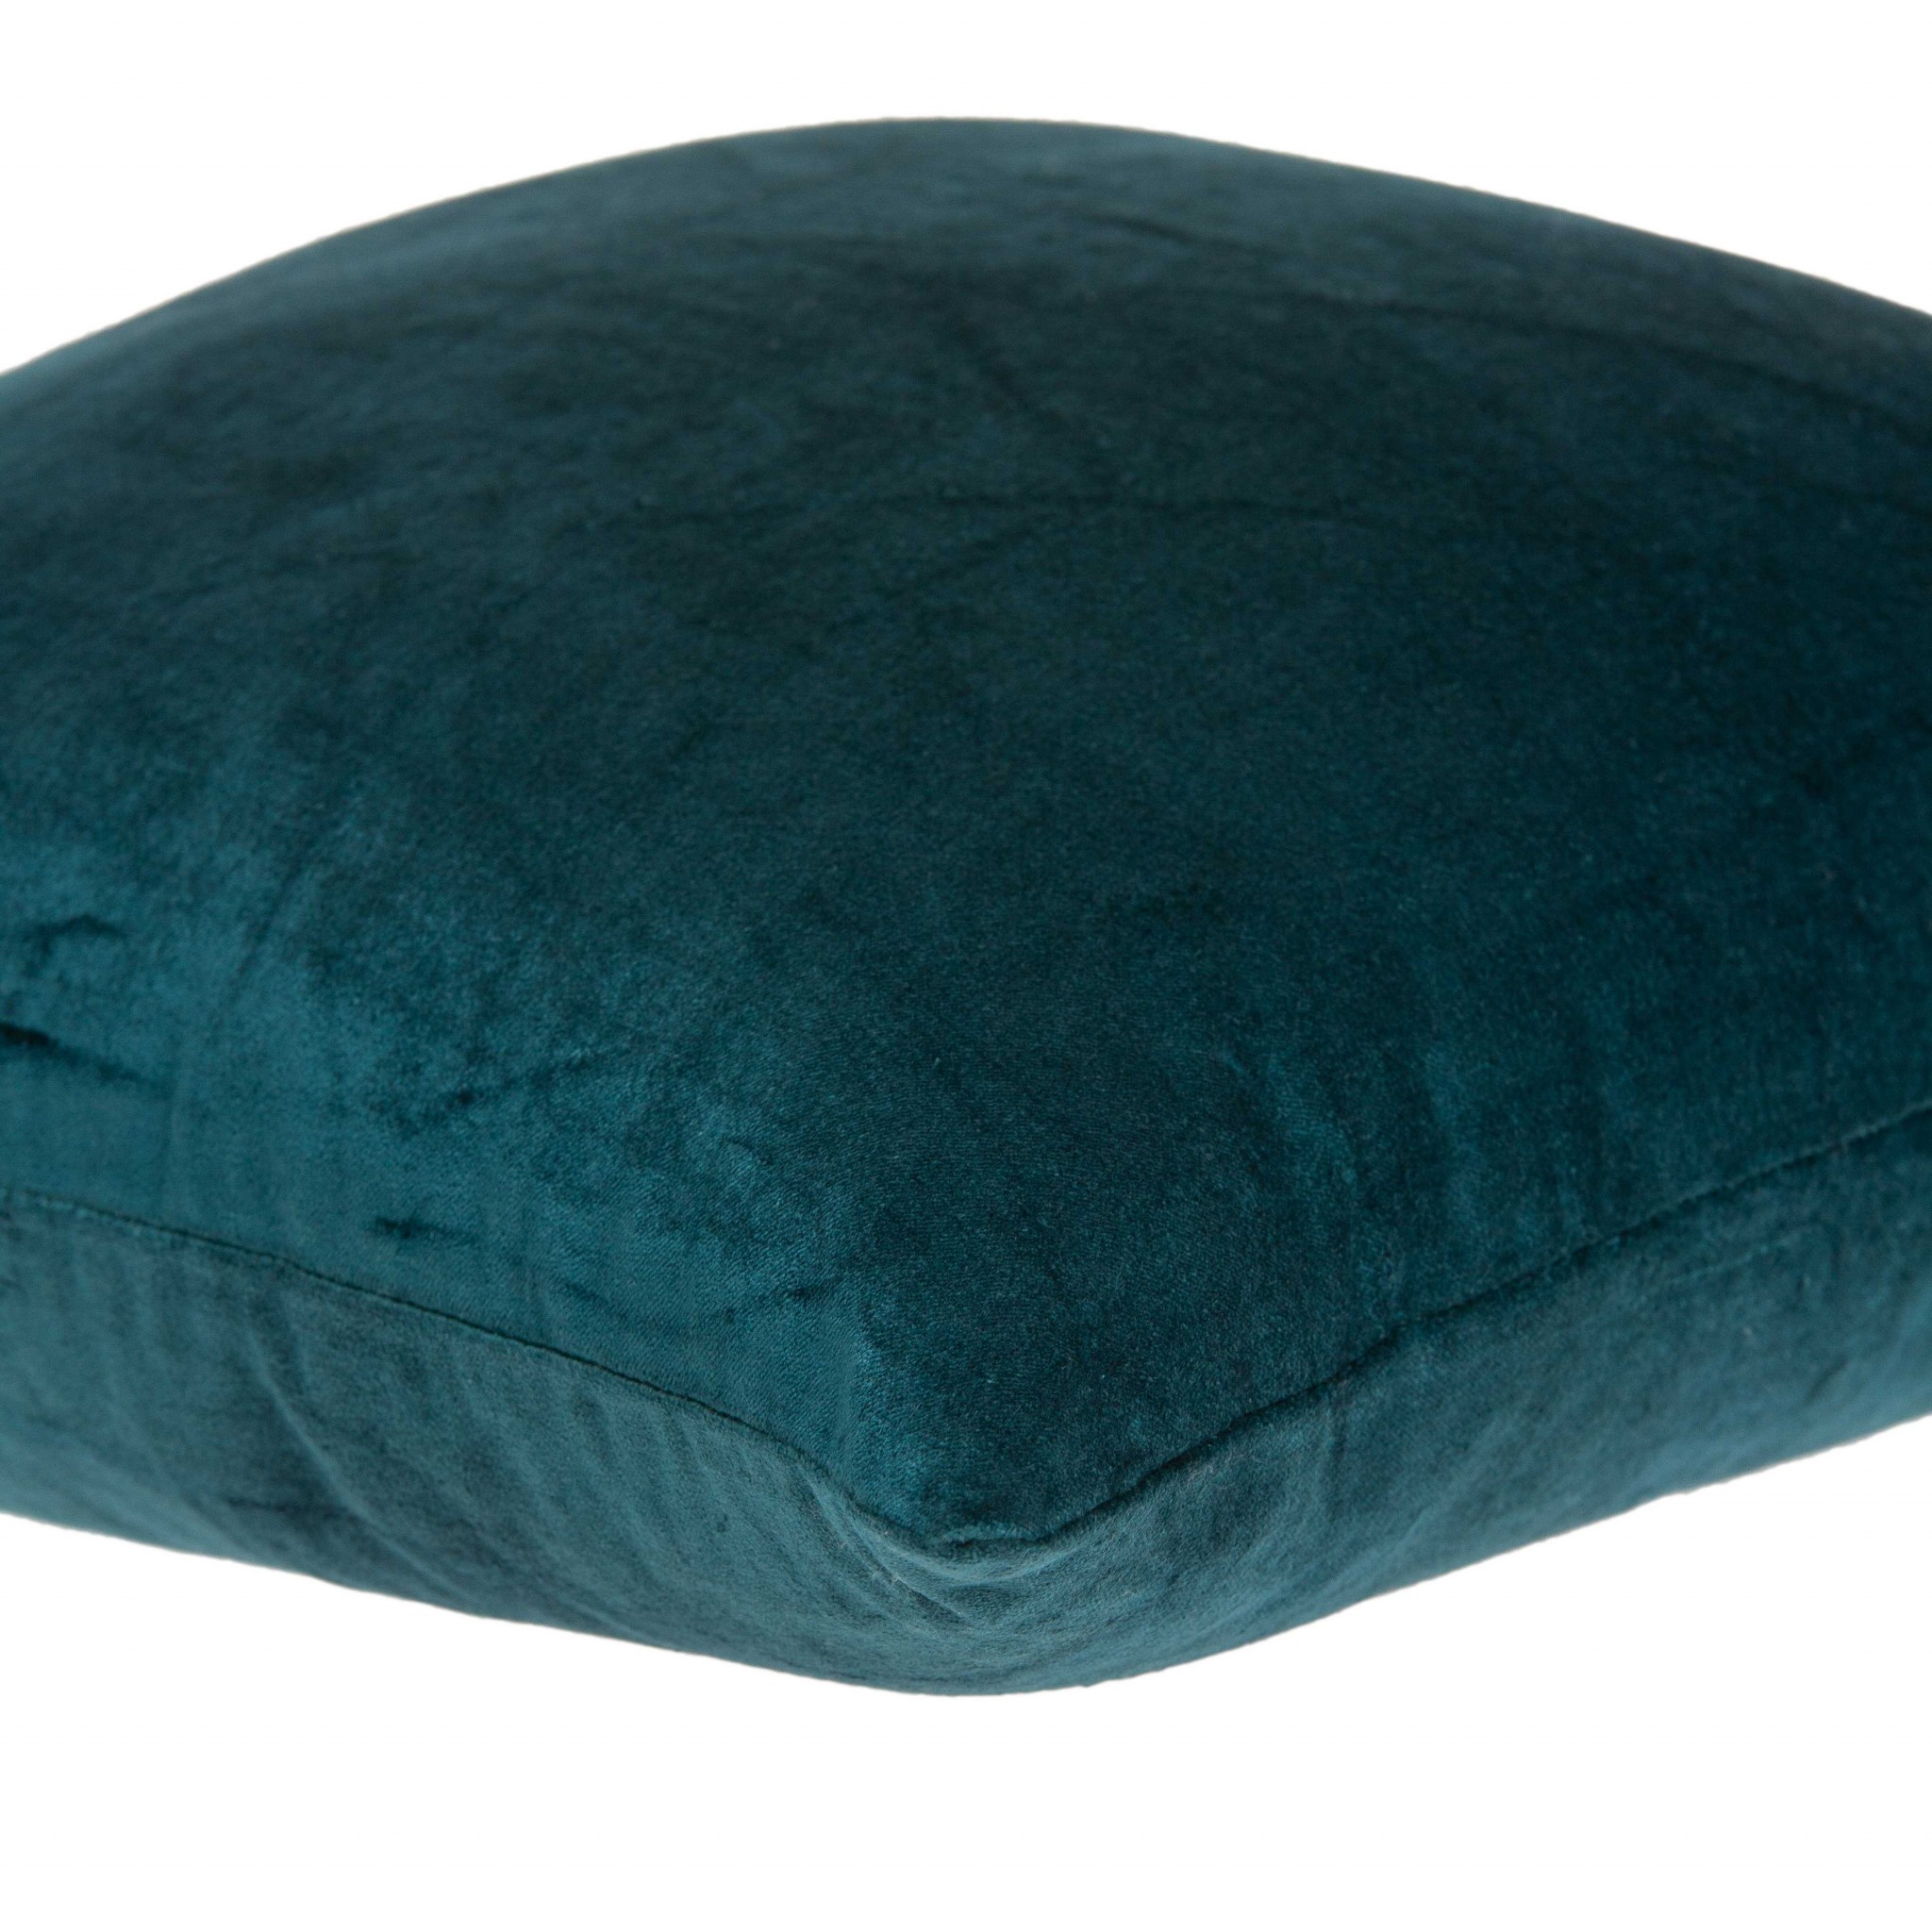 18" x 7" x 18" Transitional Teal Solid Pillow Cover With Down Insert